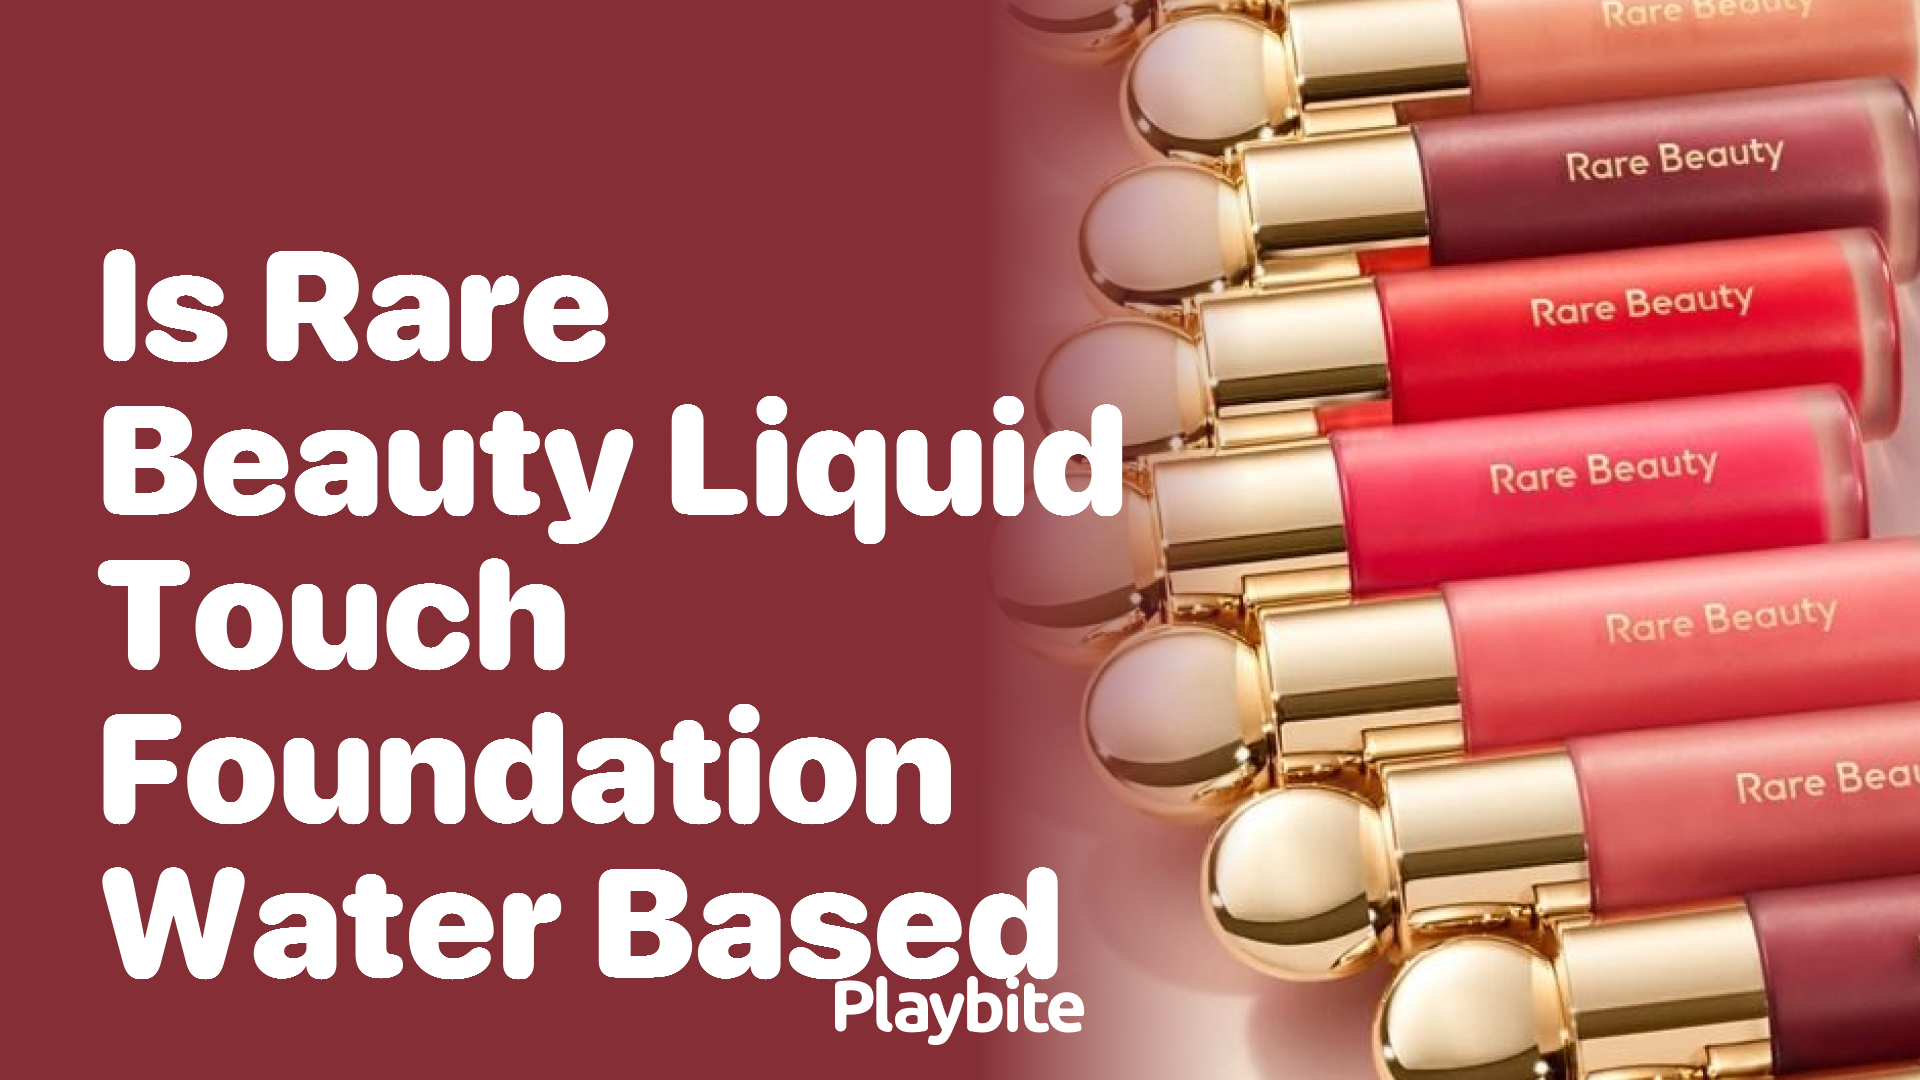 Is Rare Beauty Liquid Touch Foundation Water-Based?